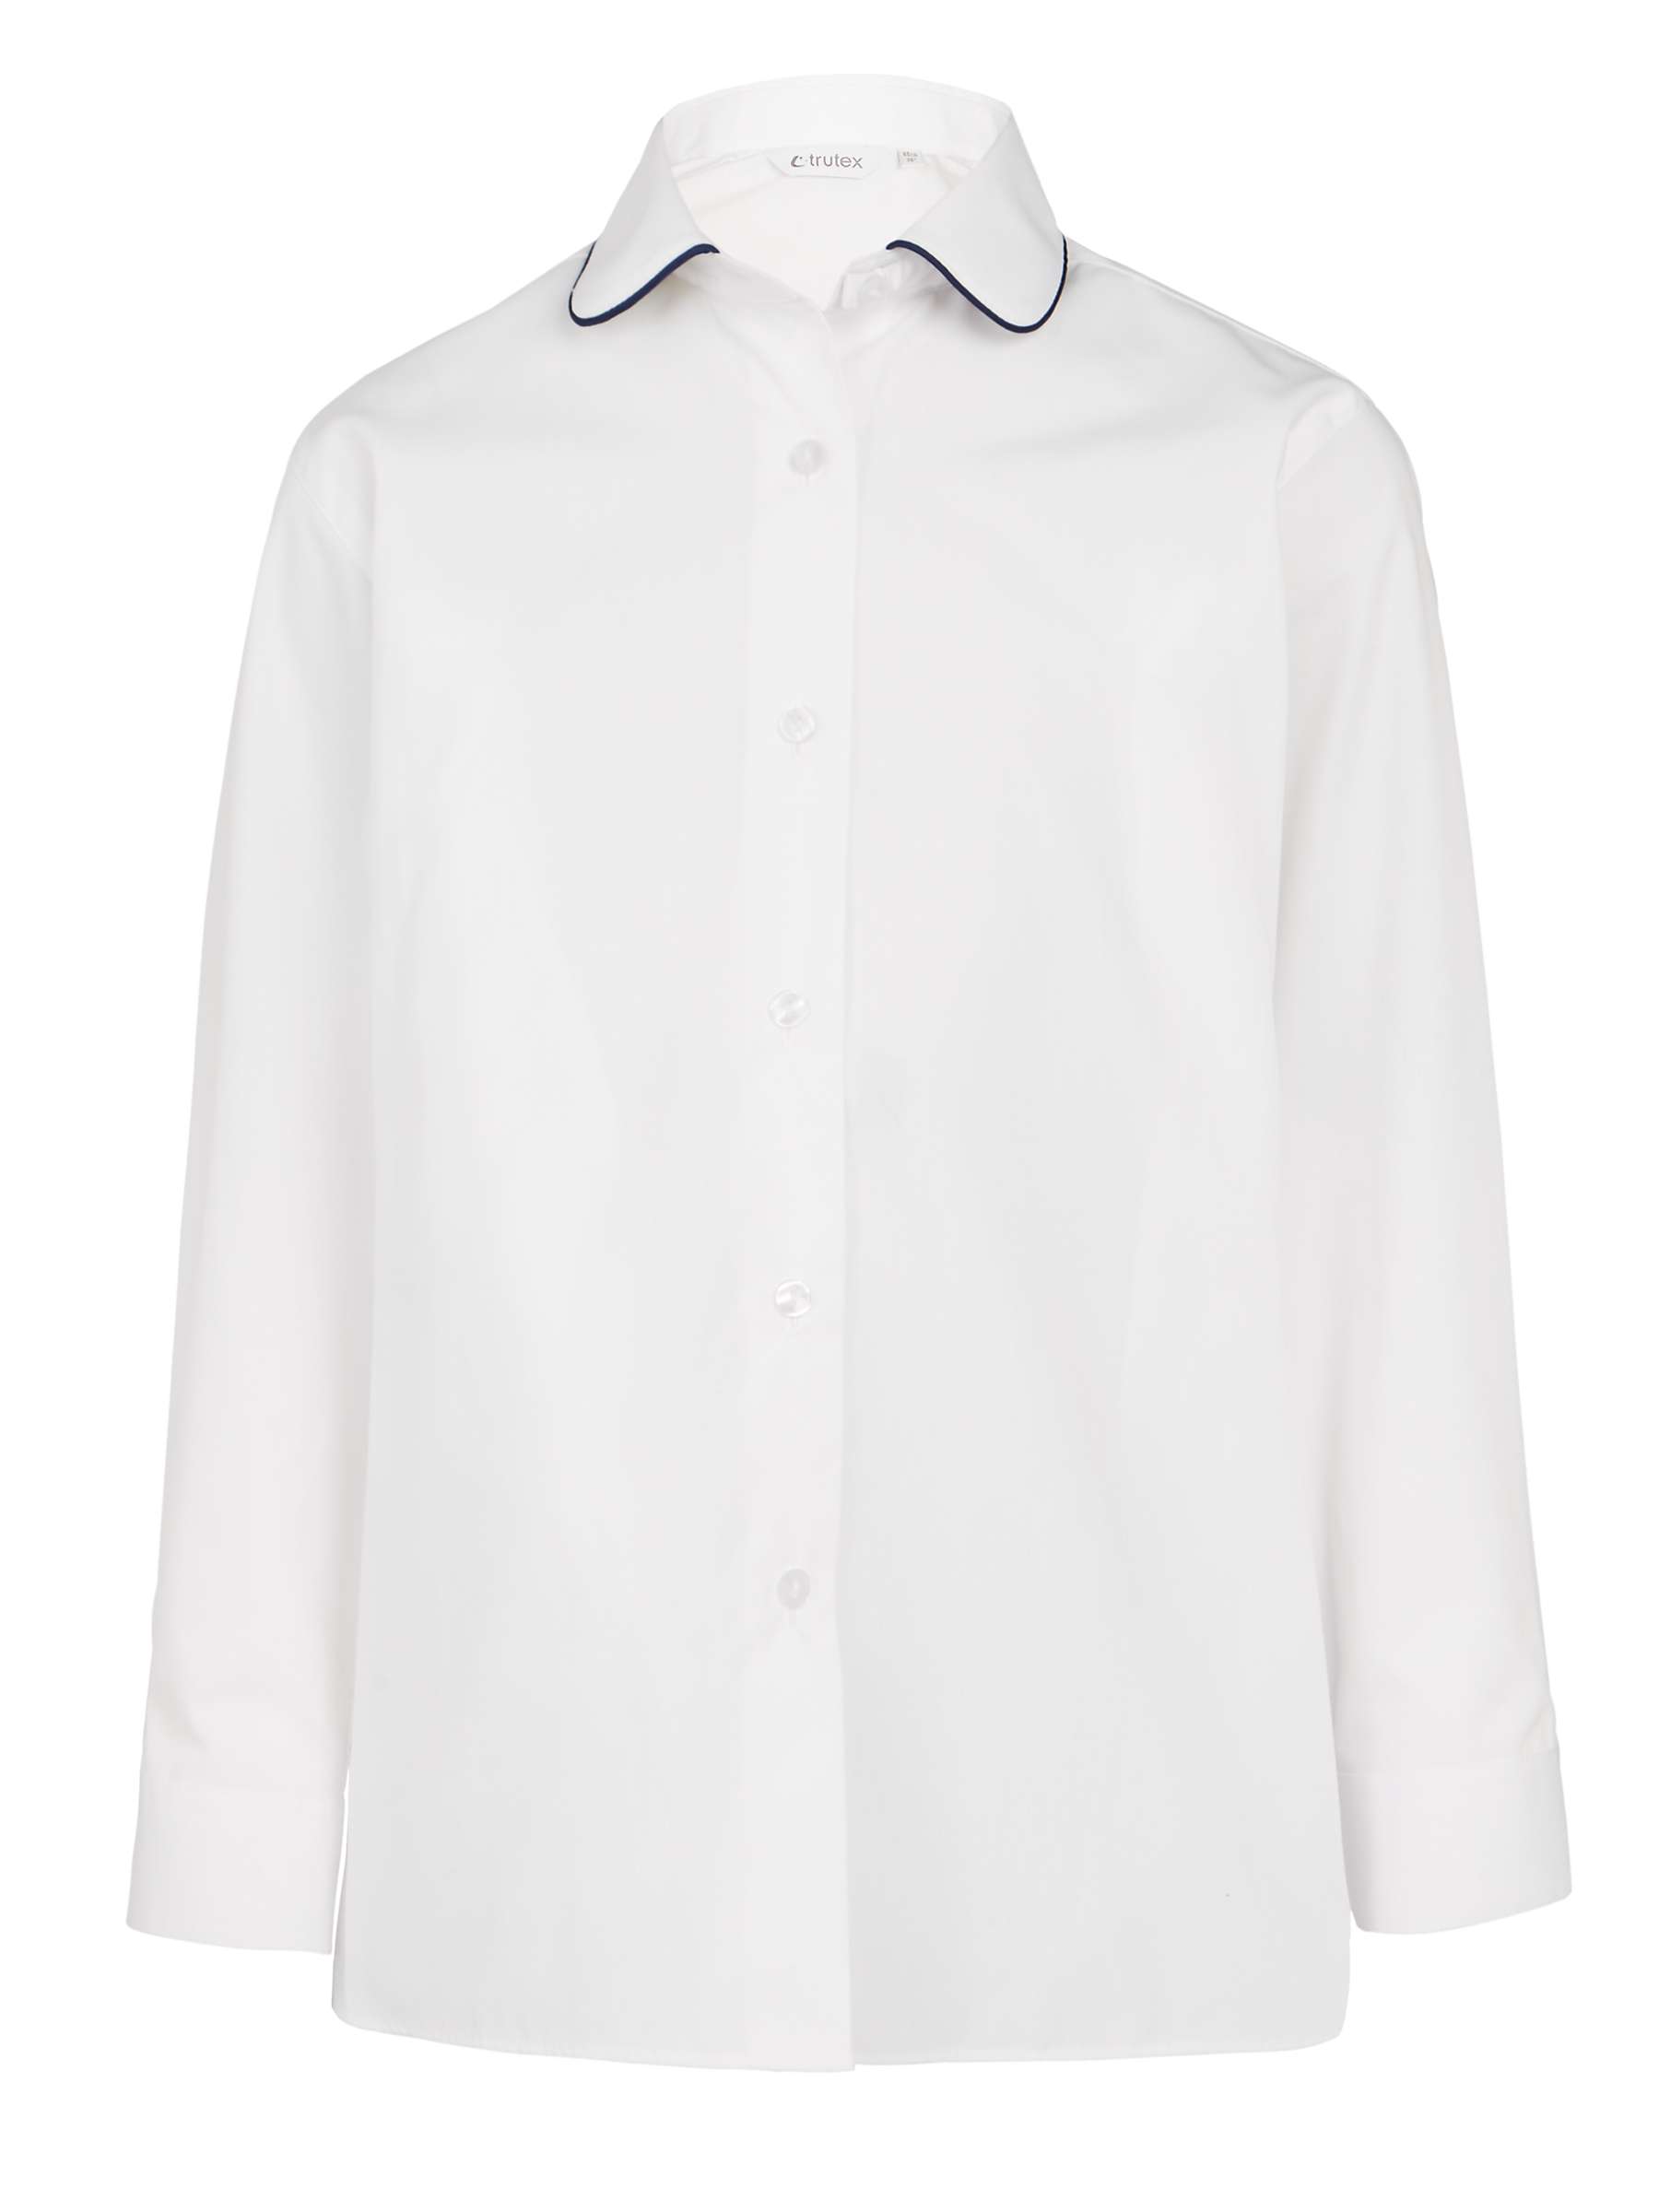 Buy Cameron Vale School Girls' Blouse, Pack of 2, White/Navy Online at johnlewis.com